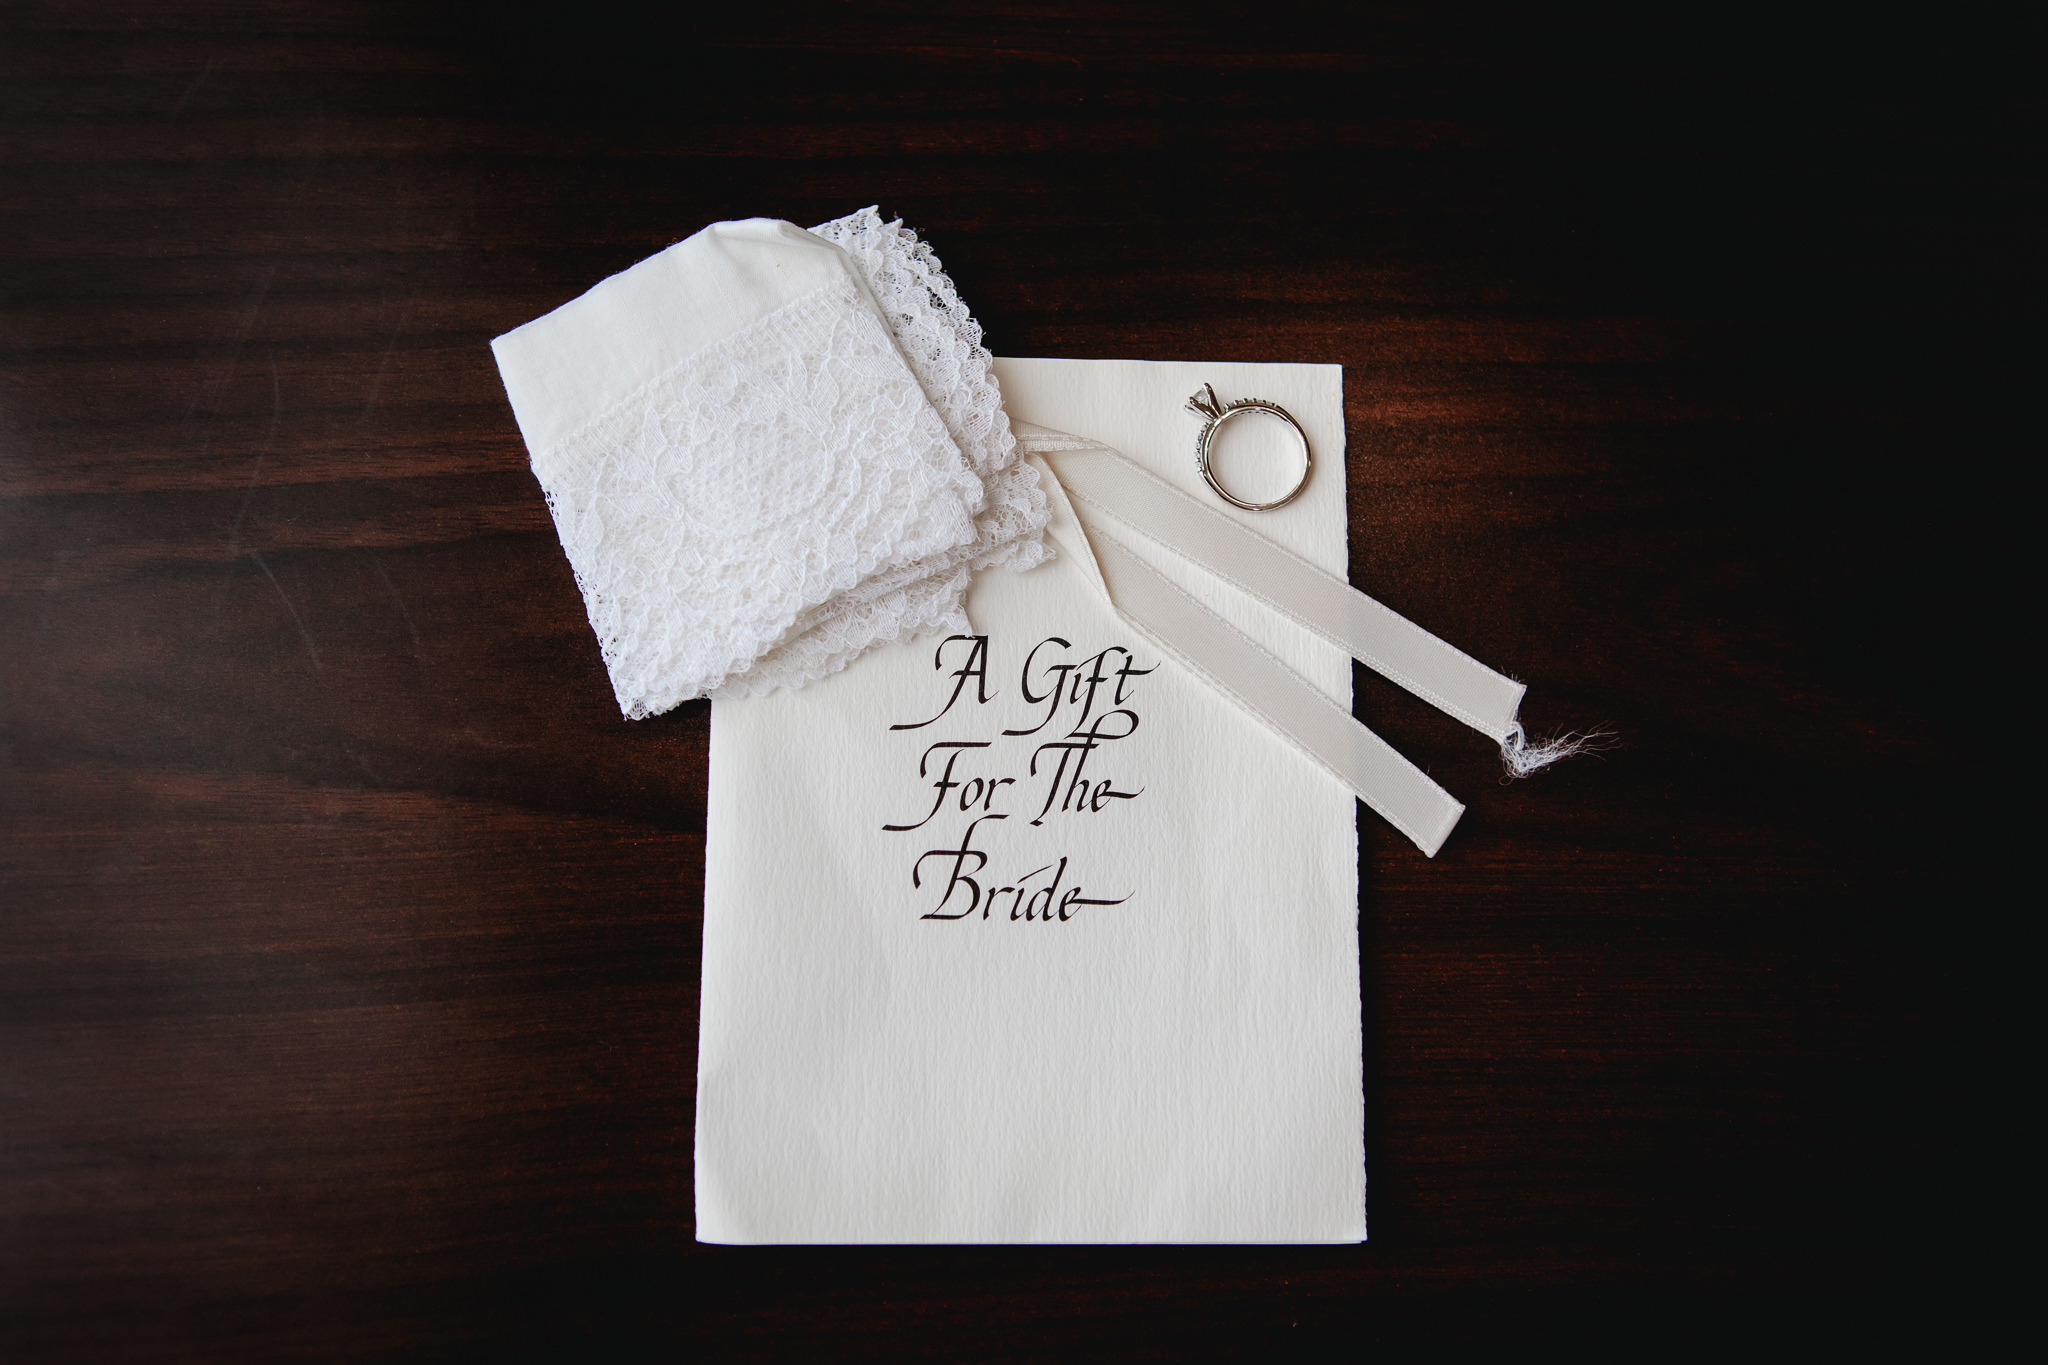 Father of the Bride's gift to his daughter on her wedding day